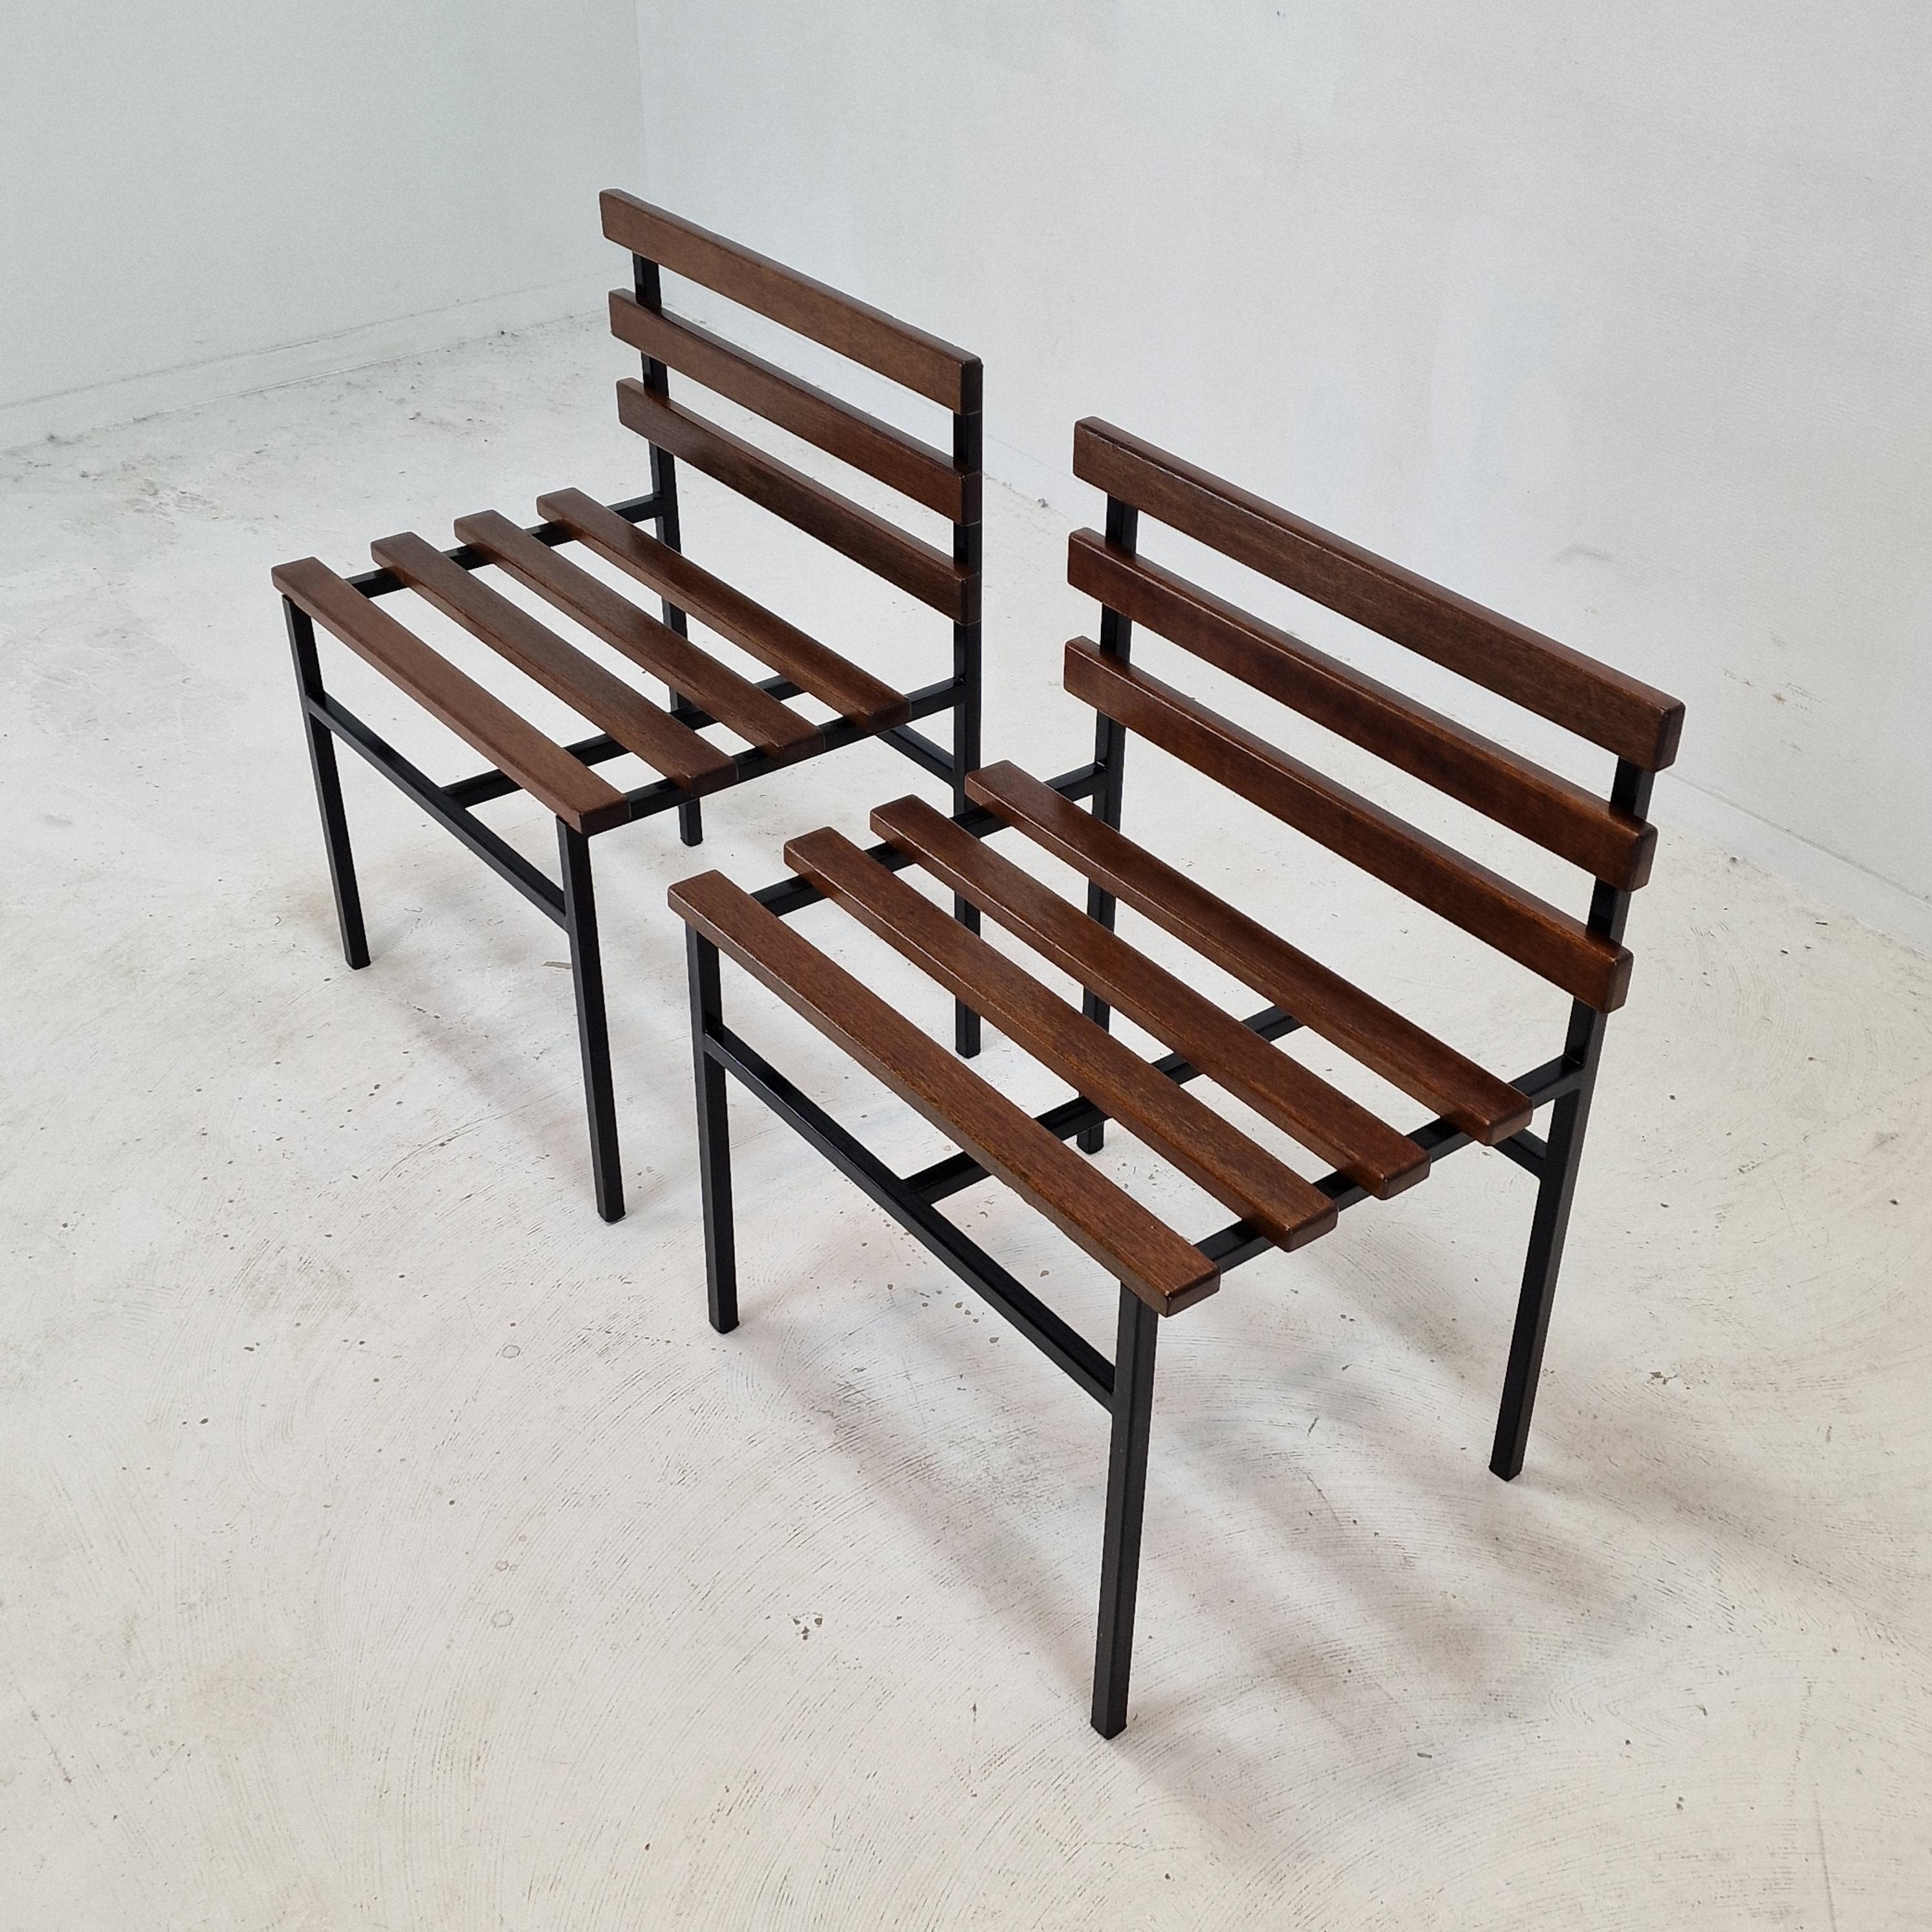 Mid-20th Century Midcentury Set of 2 Chairs or Benches in Teak, Italy, 1960s For Sale